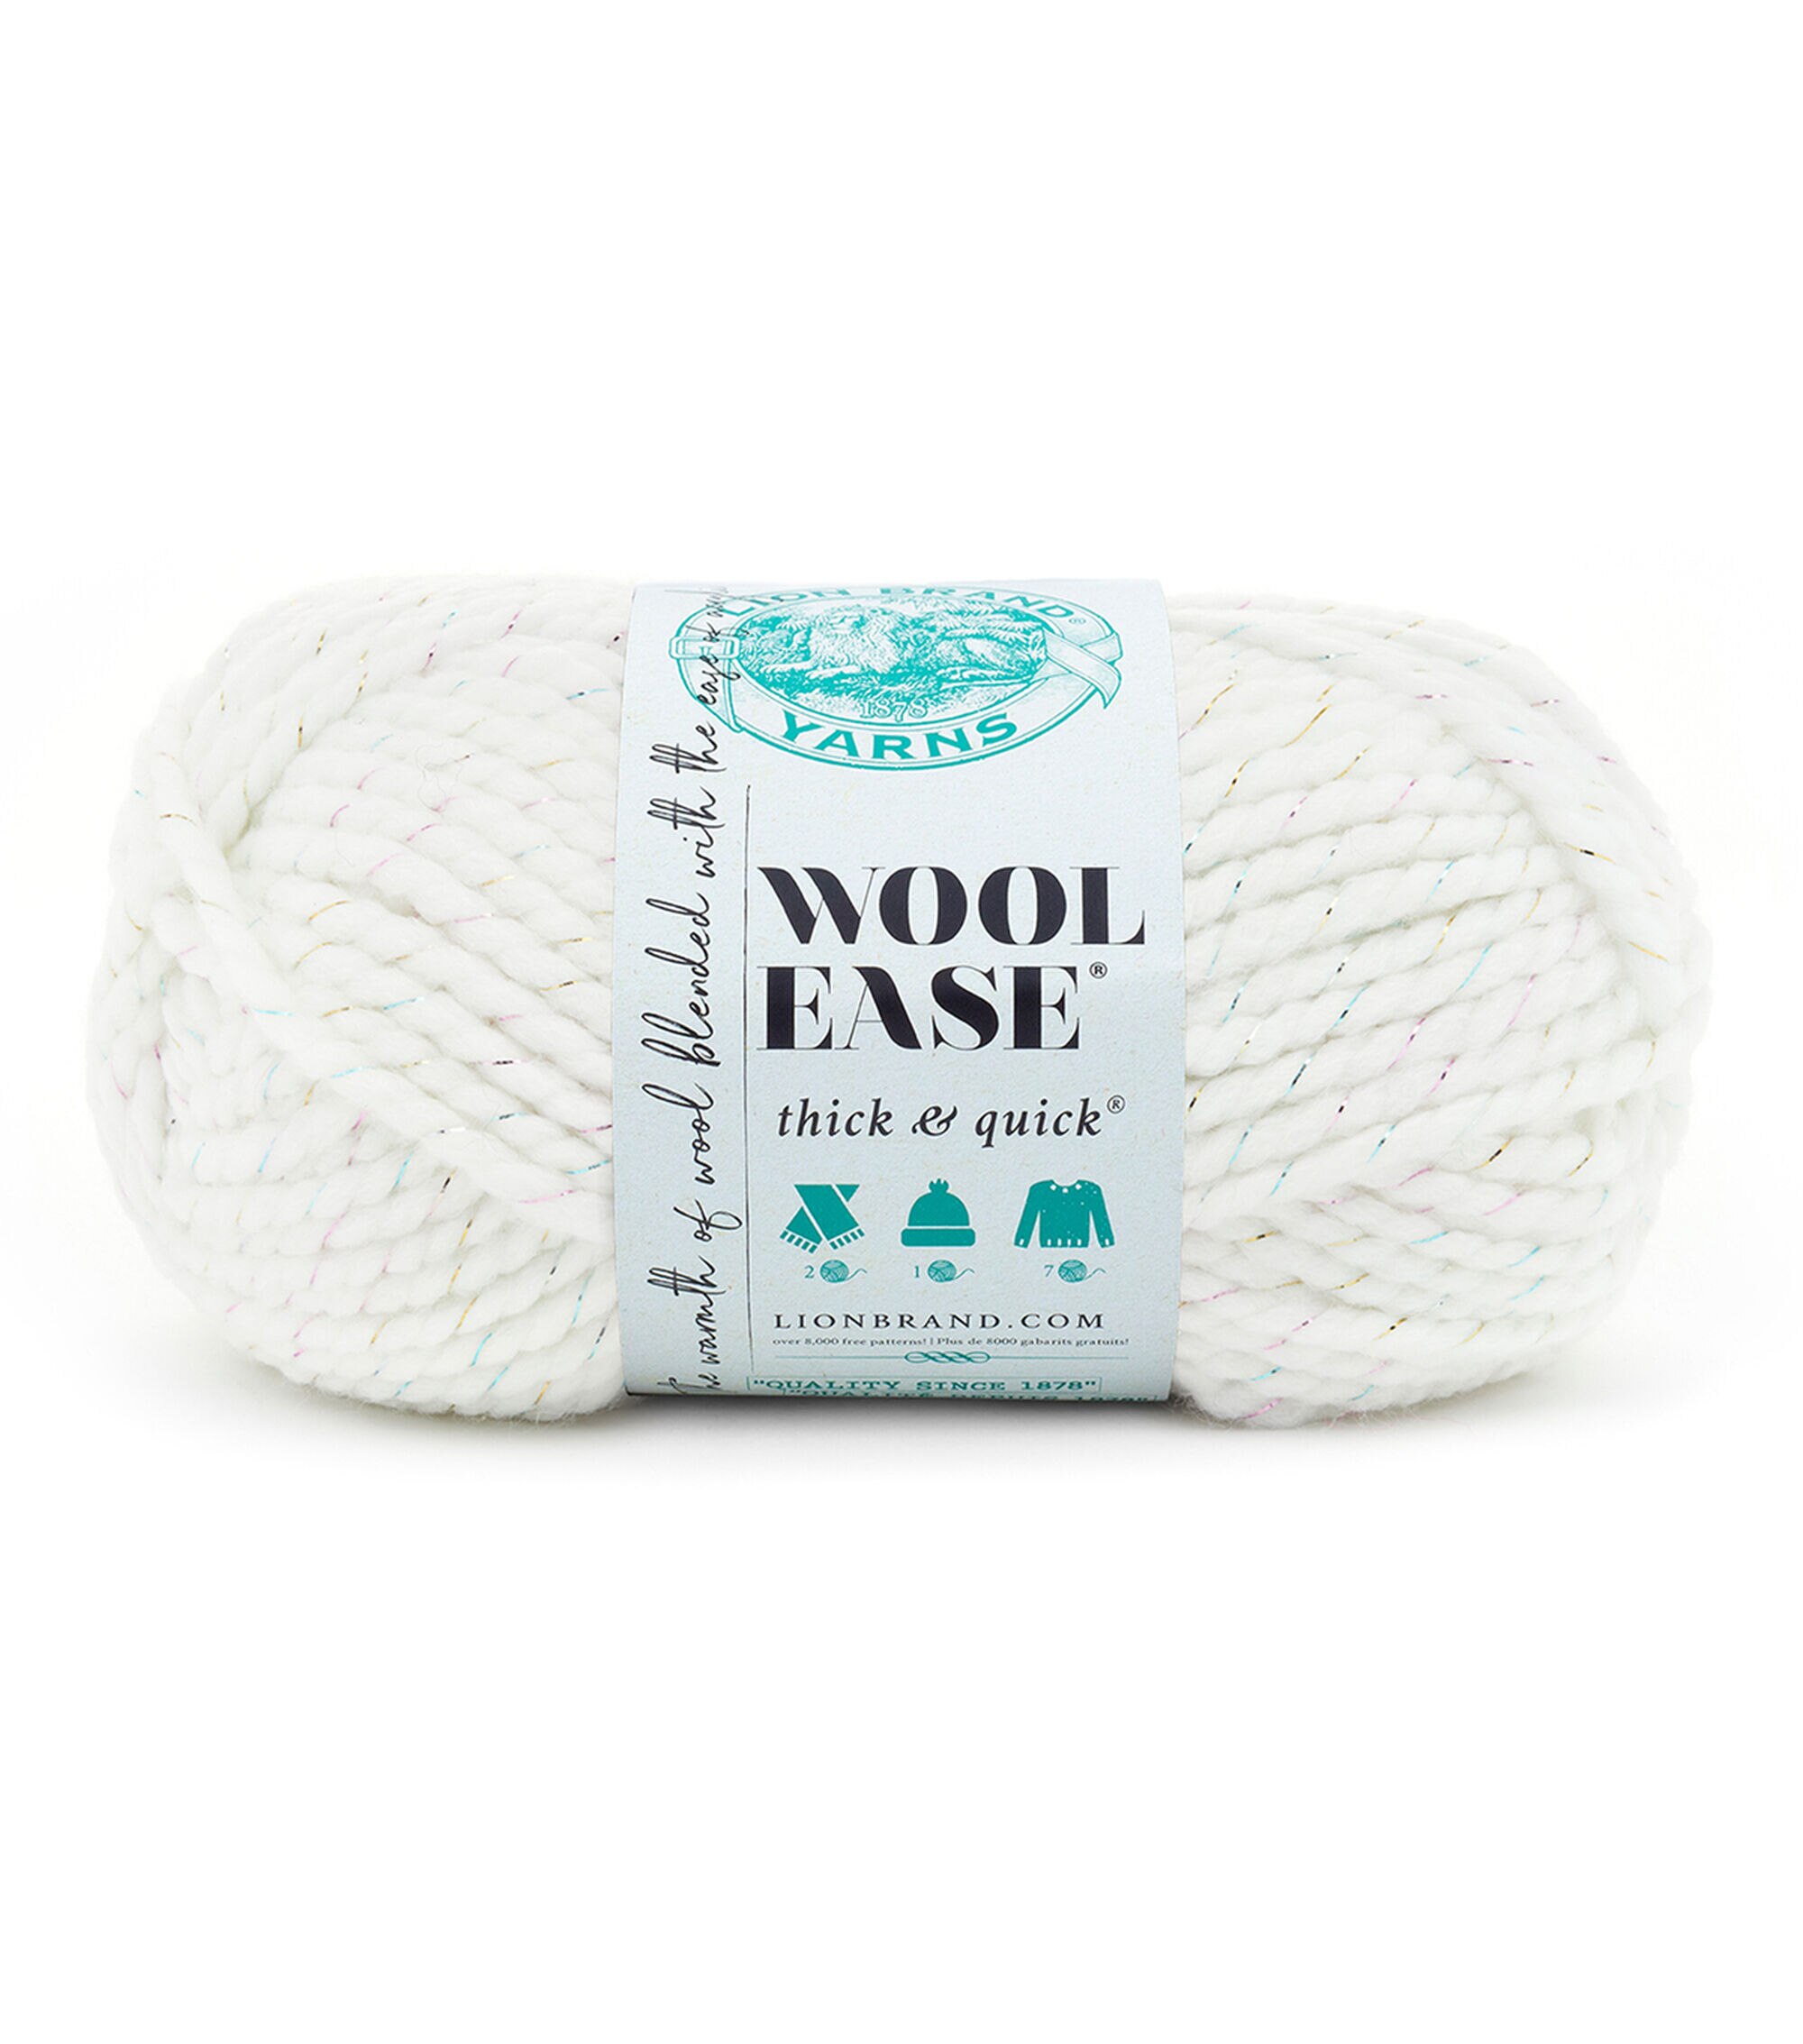 Lion Brand Wool Ease Thick And Quick Yarn JOANN